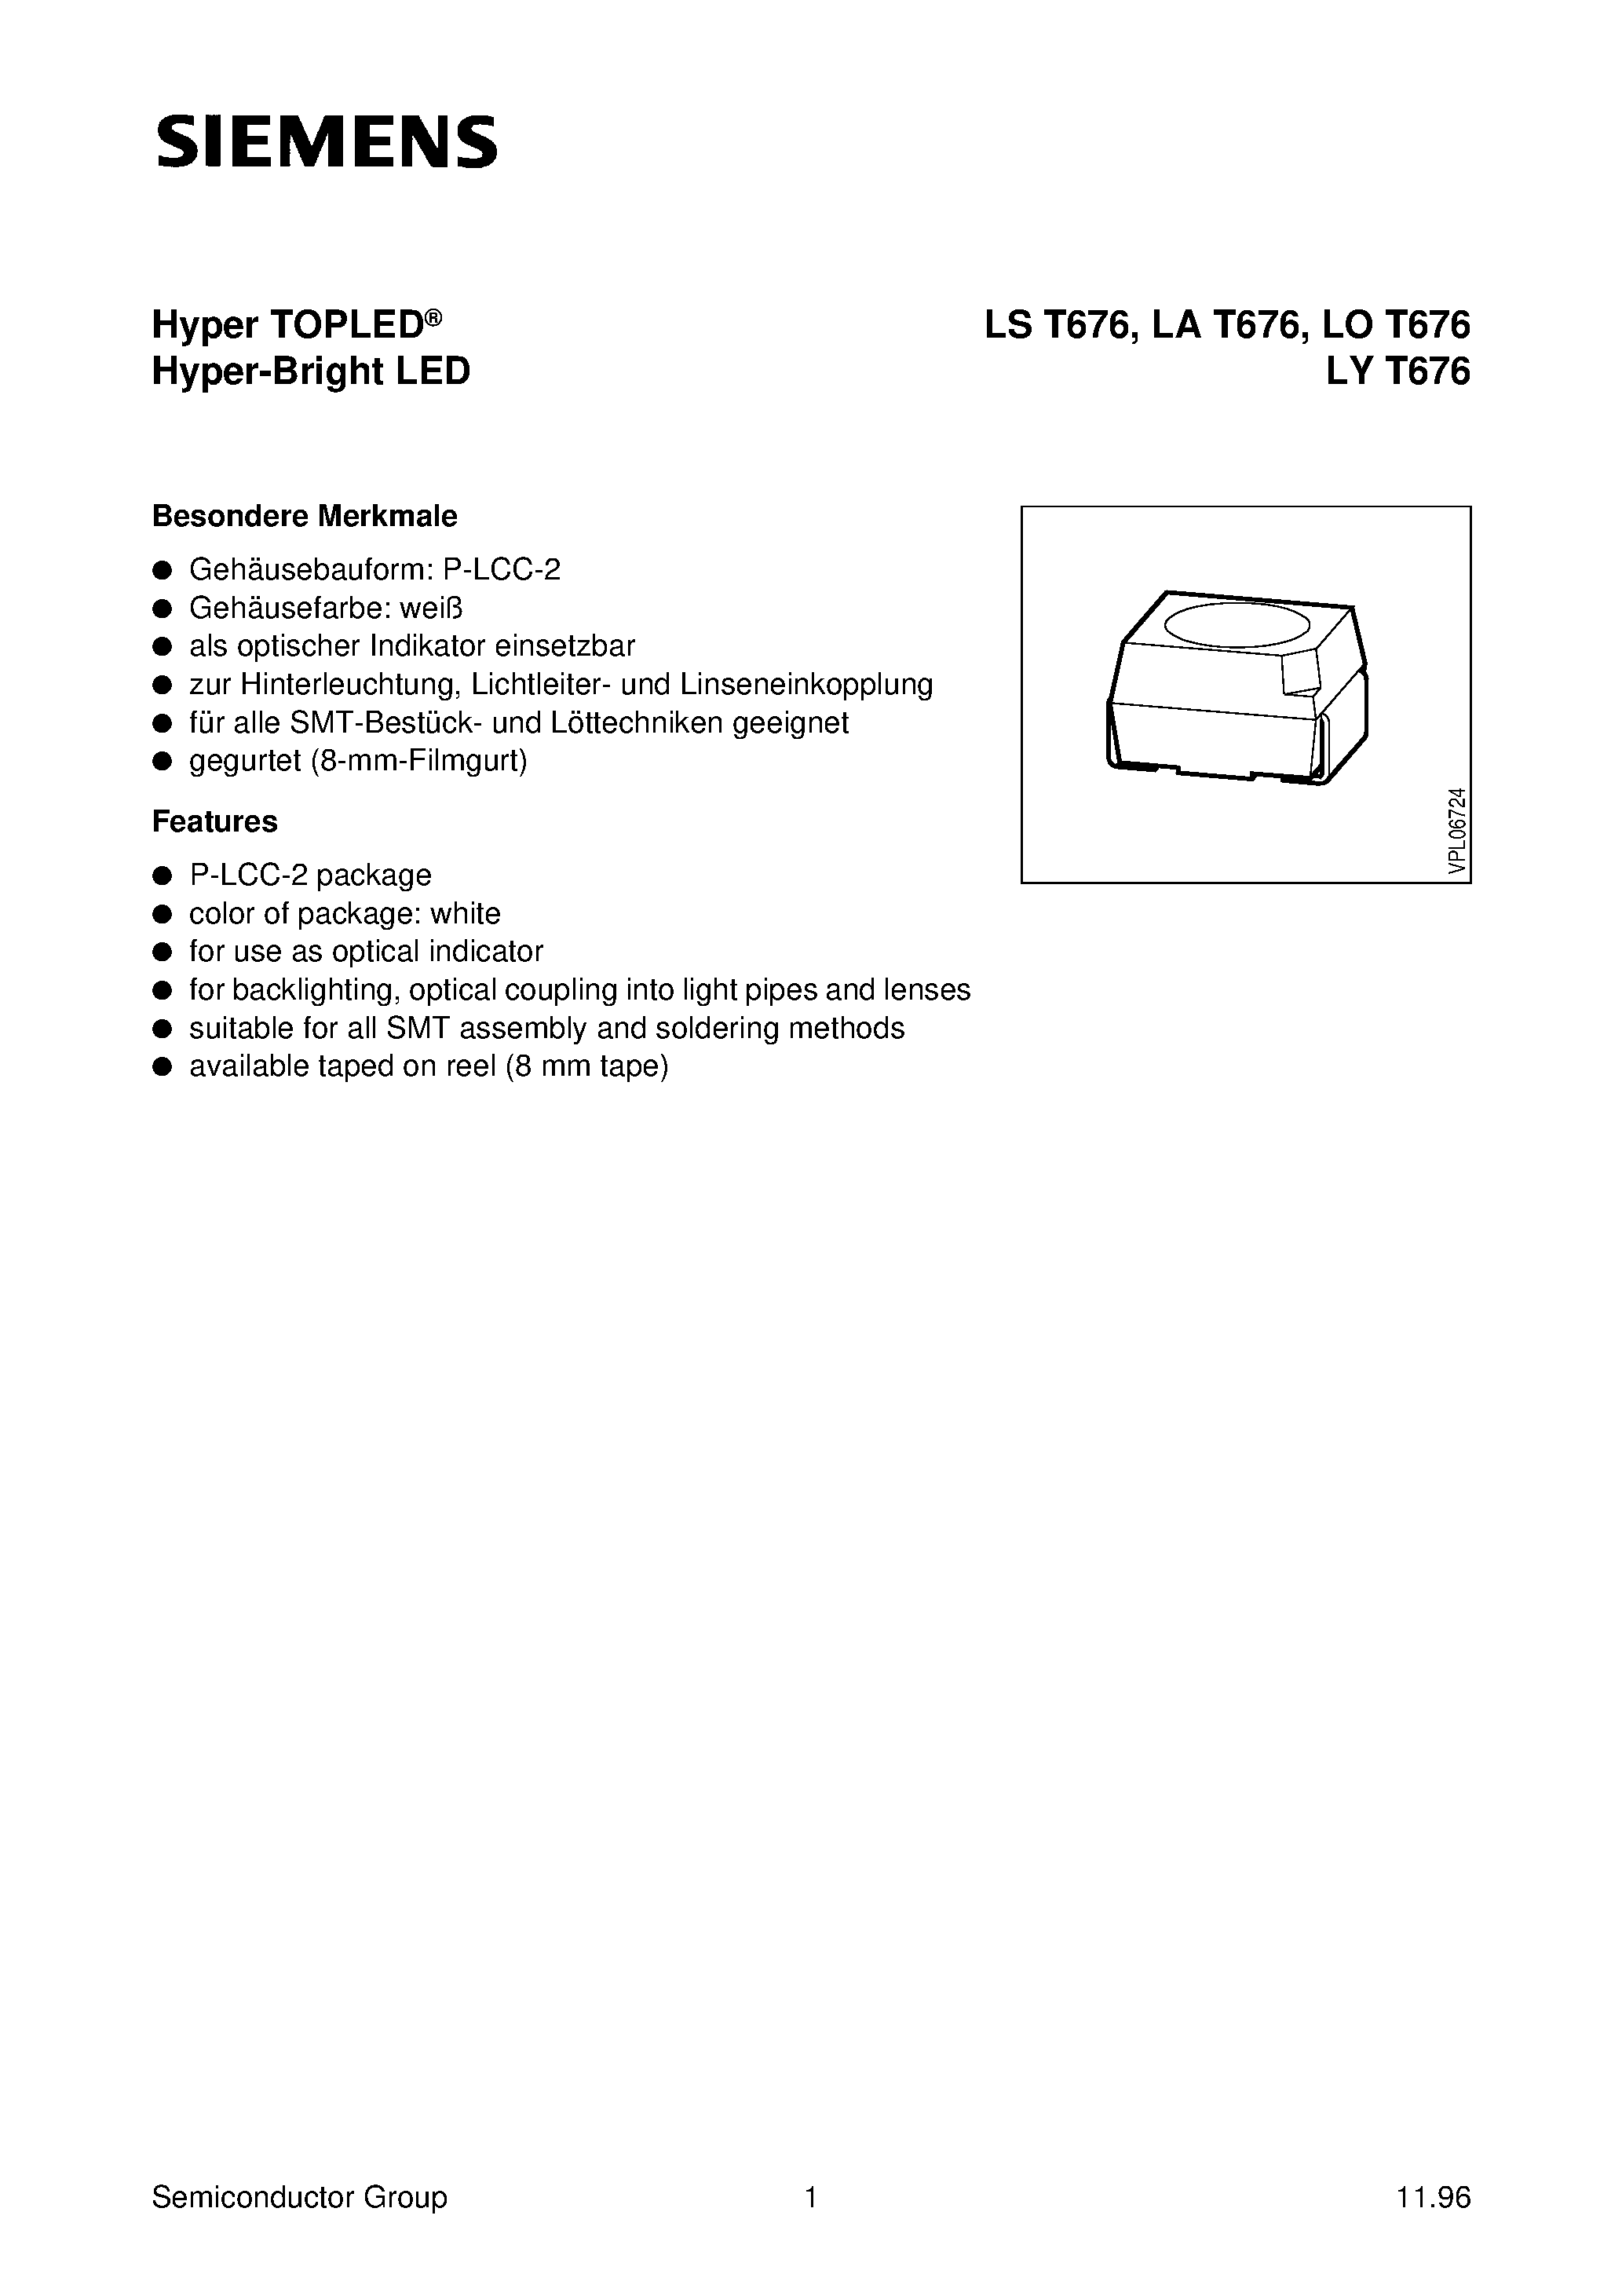 Datasheet LST676-Q - Hyper TOPLED Hyper-Bright LED page 1